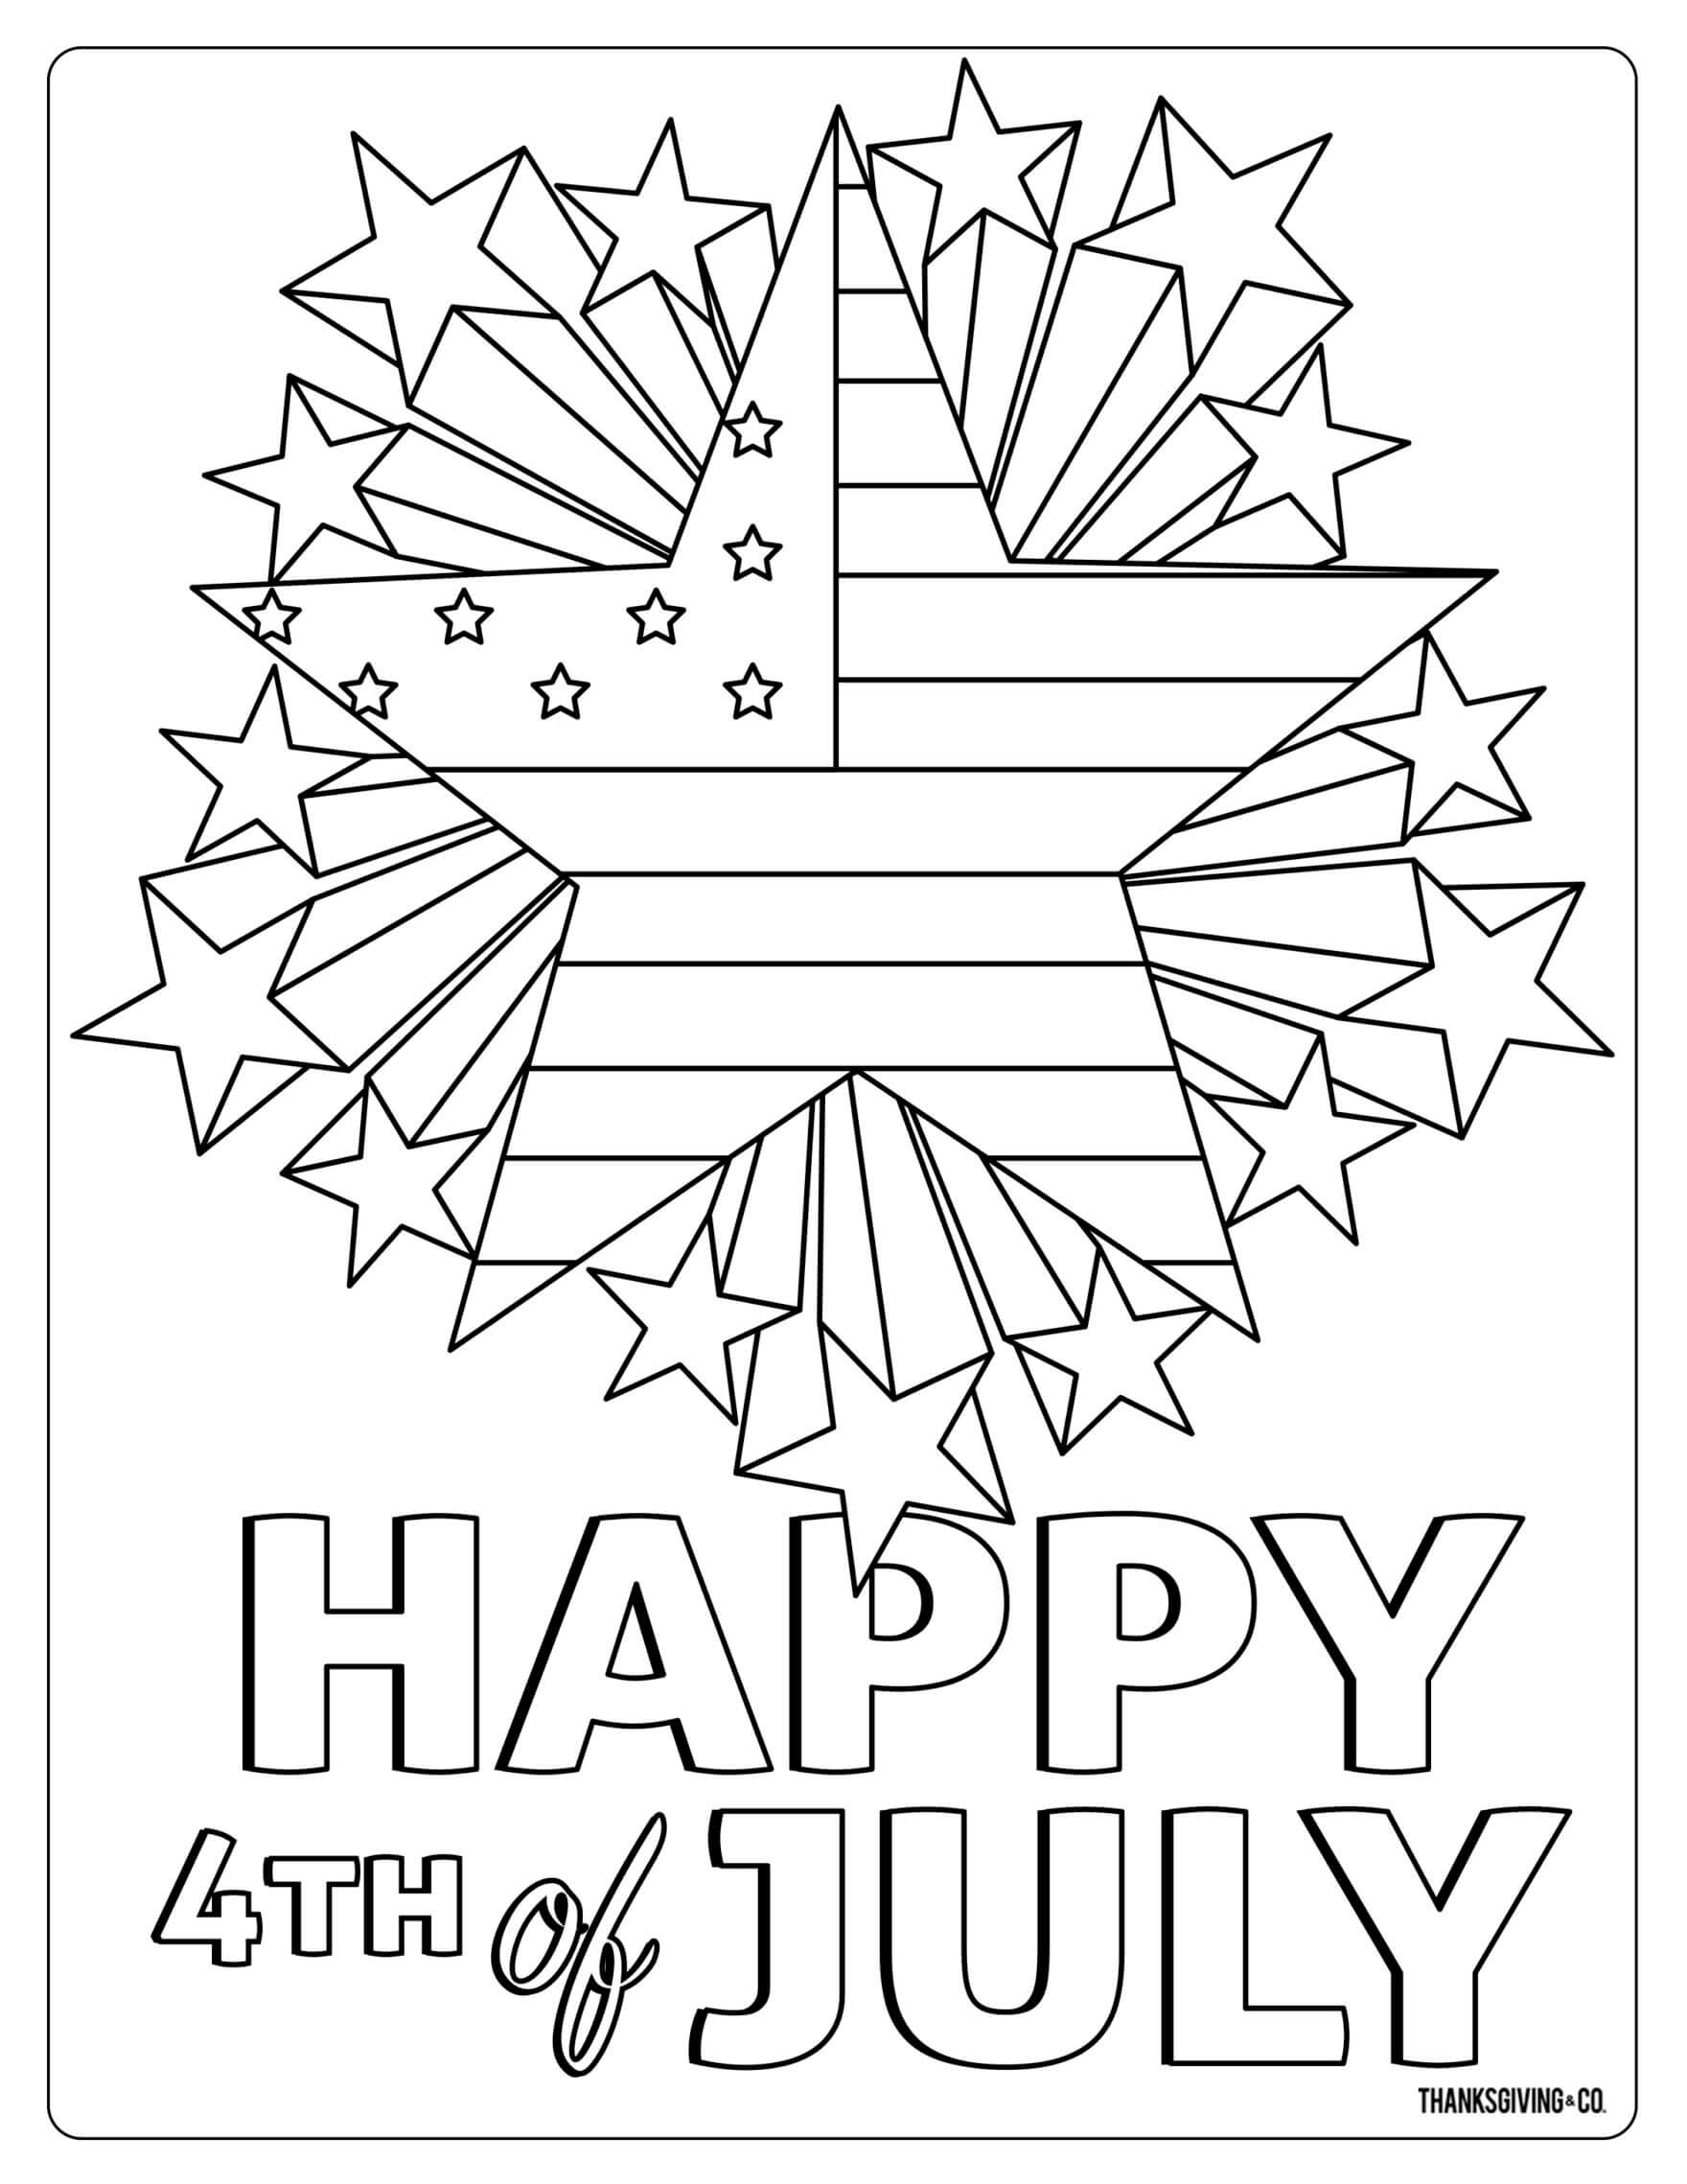 4th of july coloring pages images | thanksgiving coloring pages | summer coloring pages